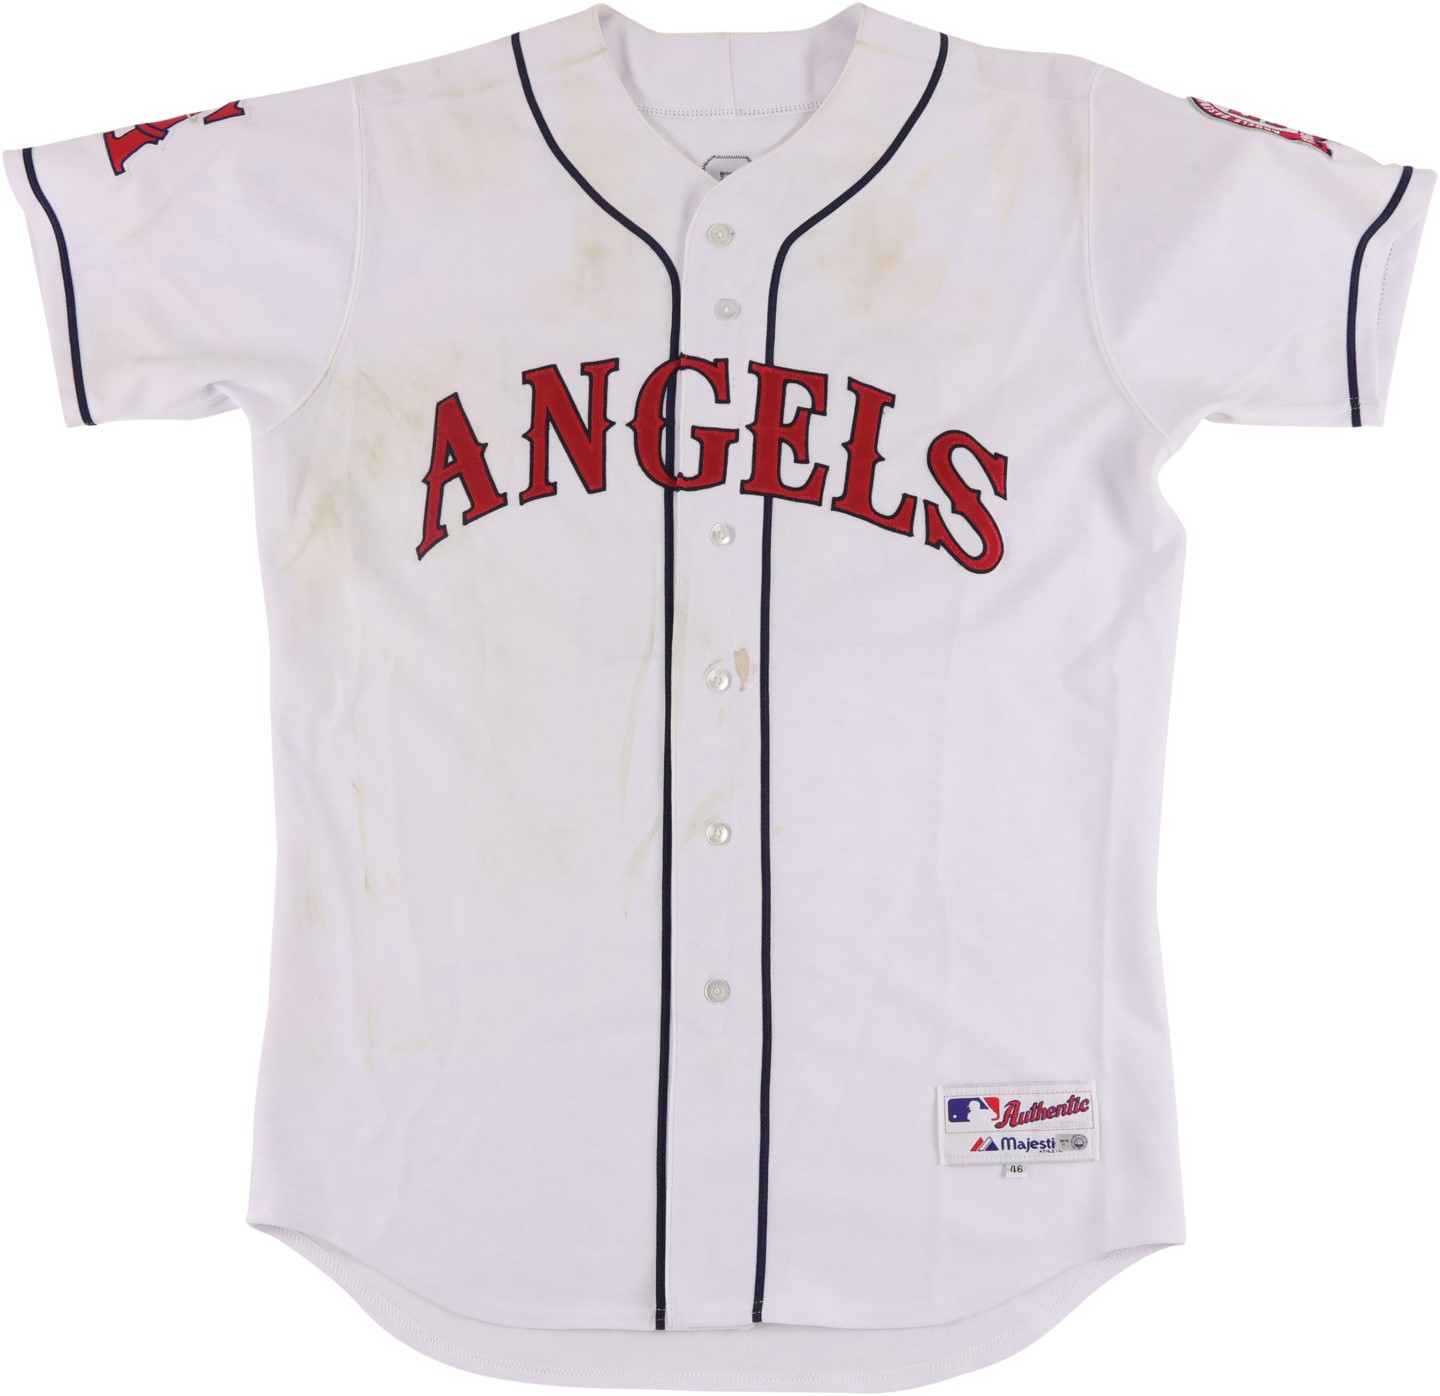 2011 Mike Trout Anaheim Angels Major League Debut Game Worn Jersey (Sports Investors Photo-Matching LOA & MLB Authenticated)